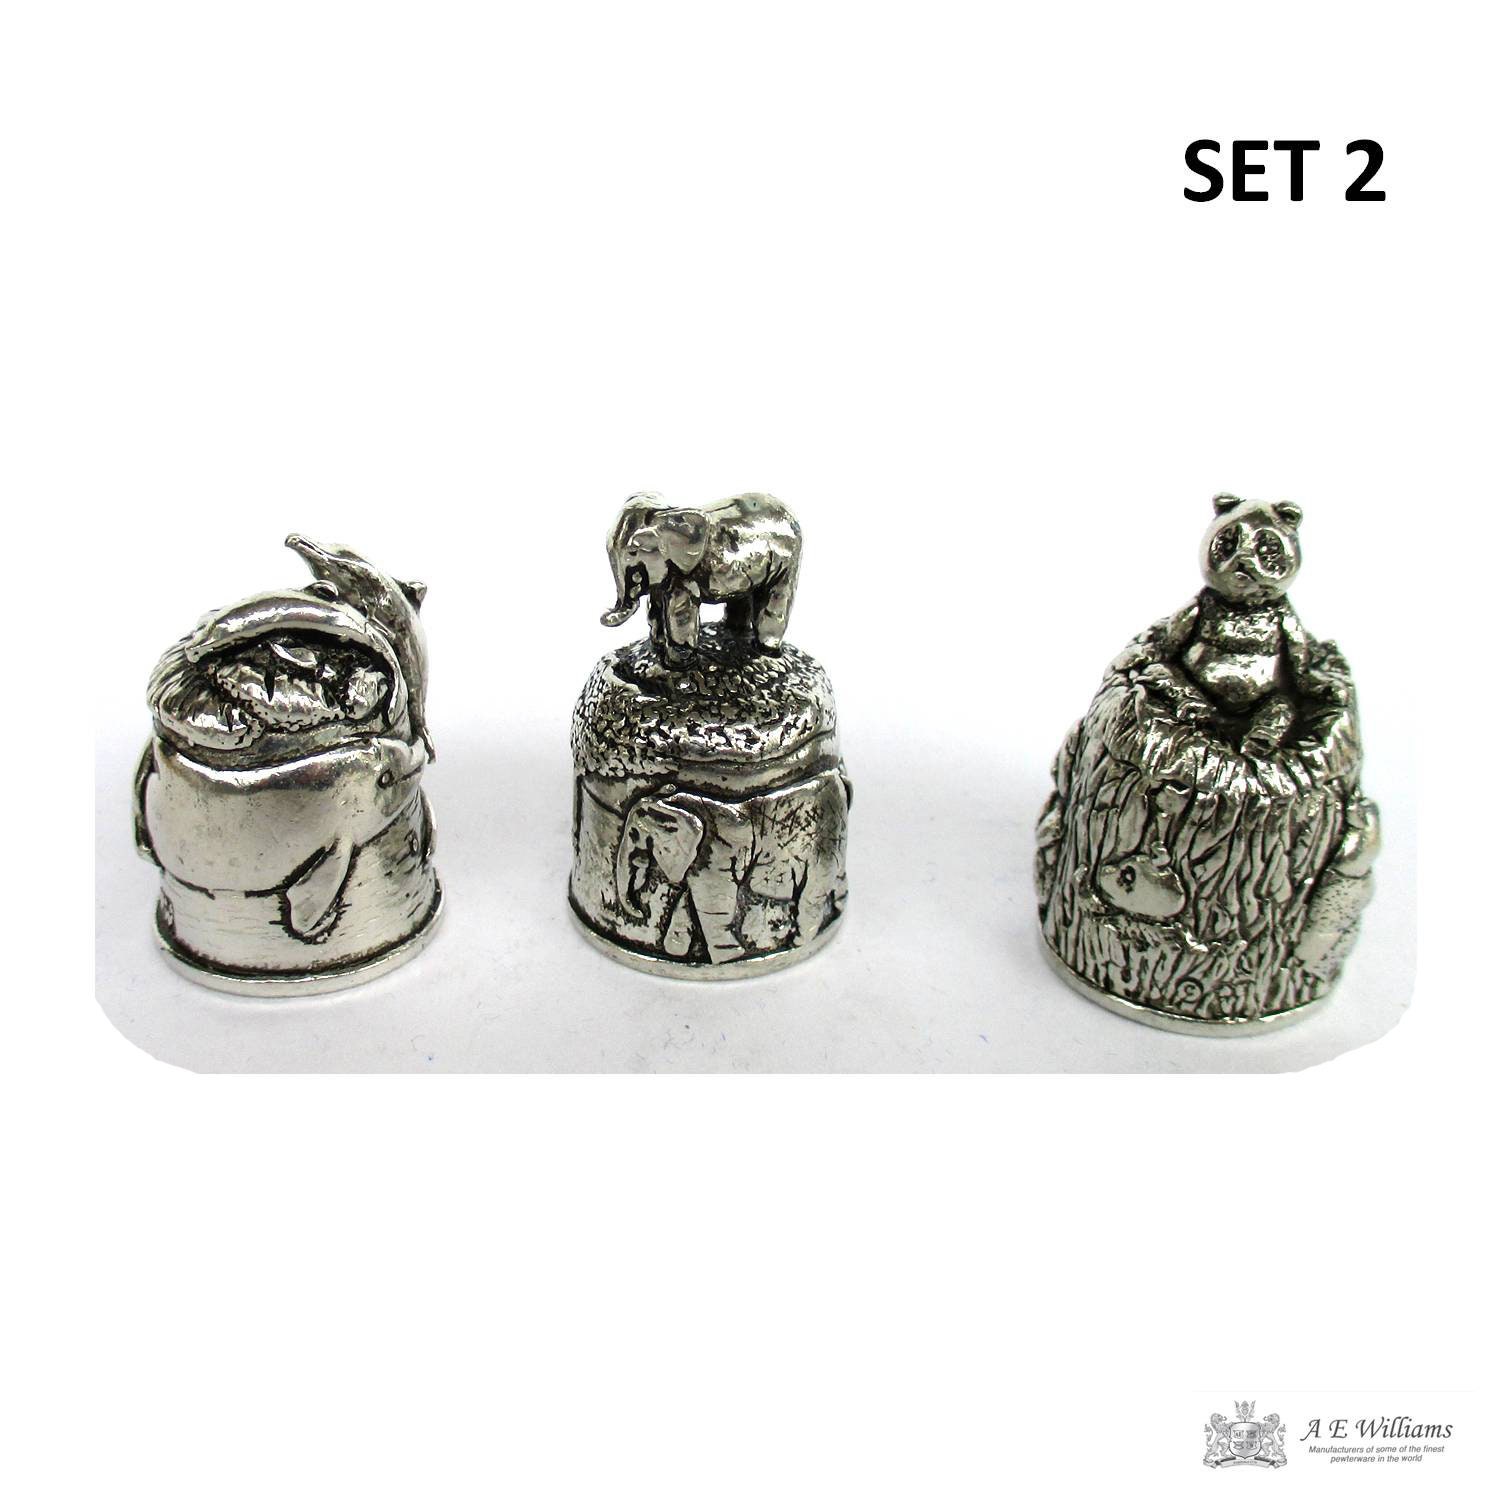 Three Protected Animals Pewter Thimble Miniature A.E.Williams Made in England